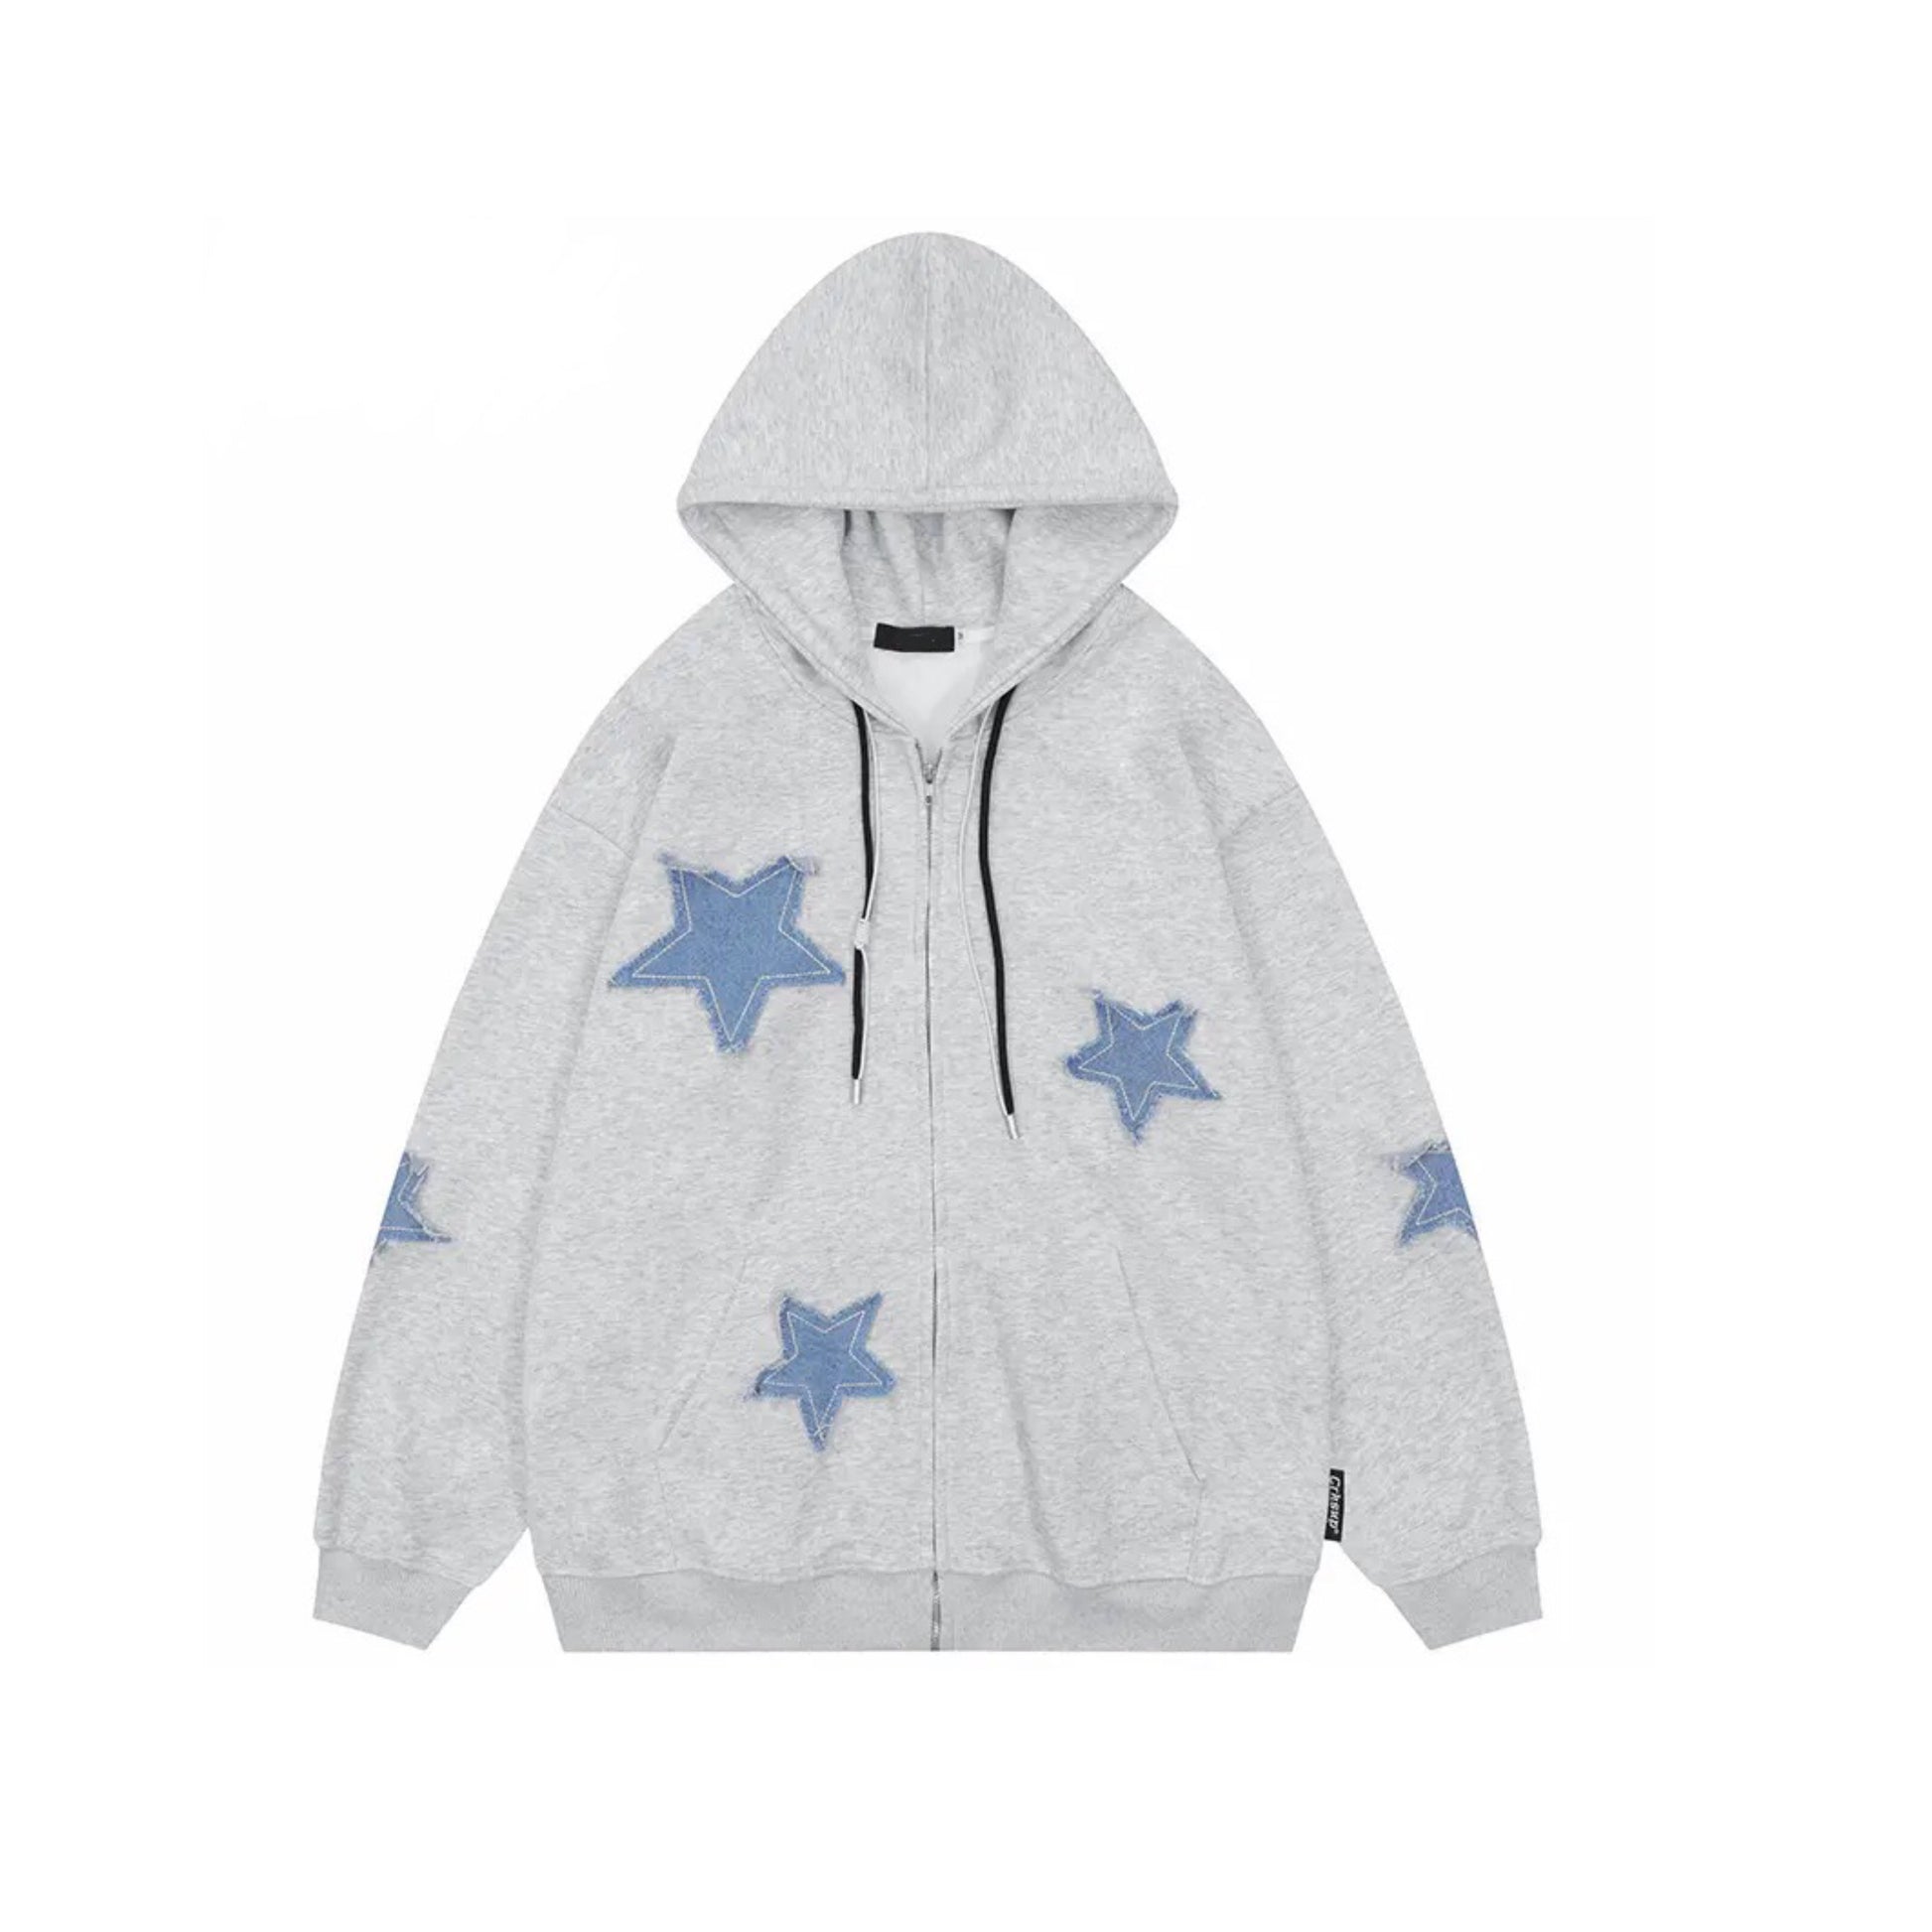 Star Patches Zip Up Hoodie 